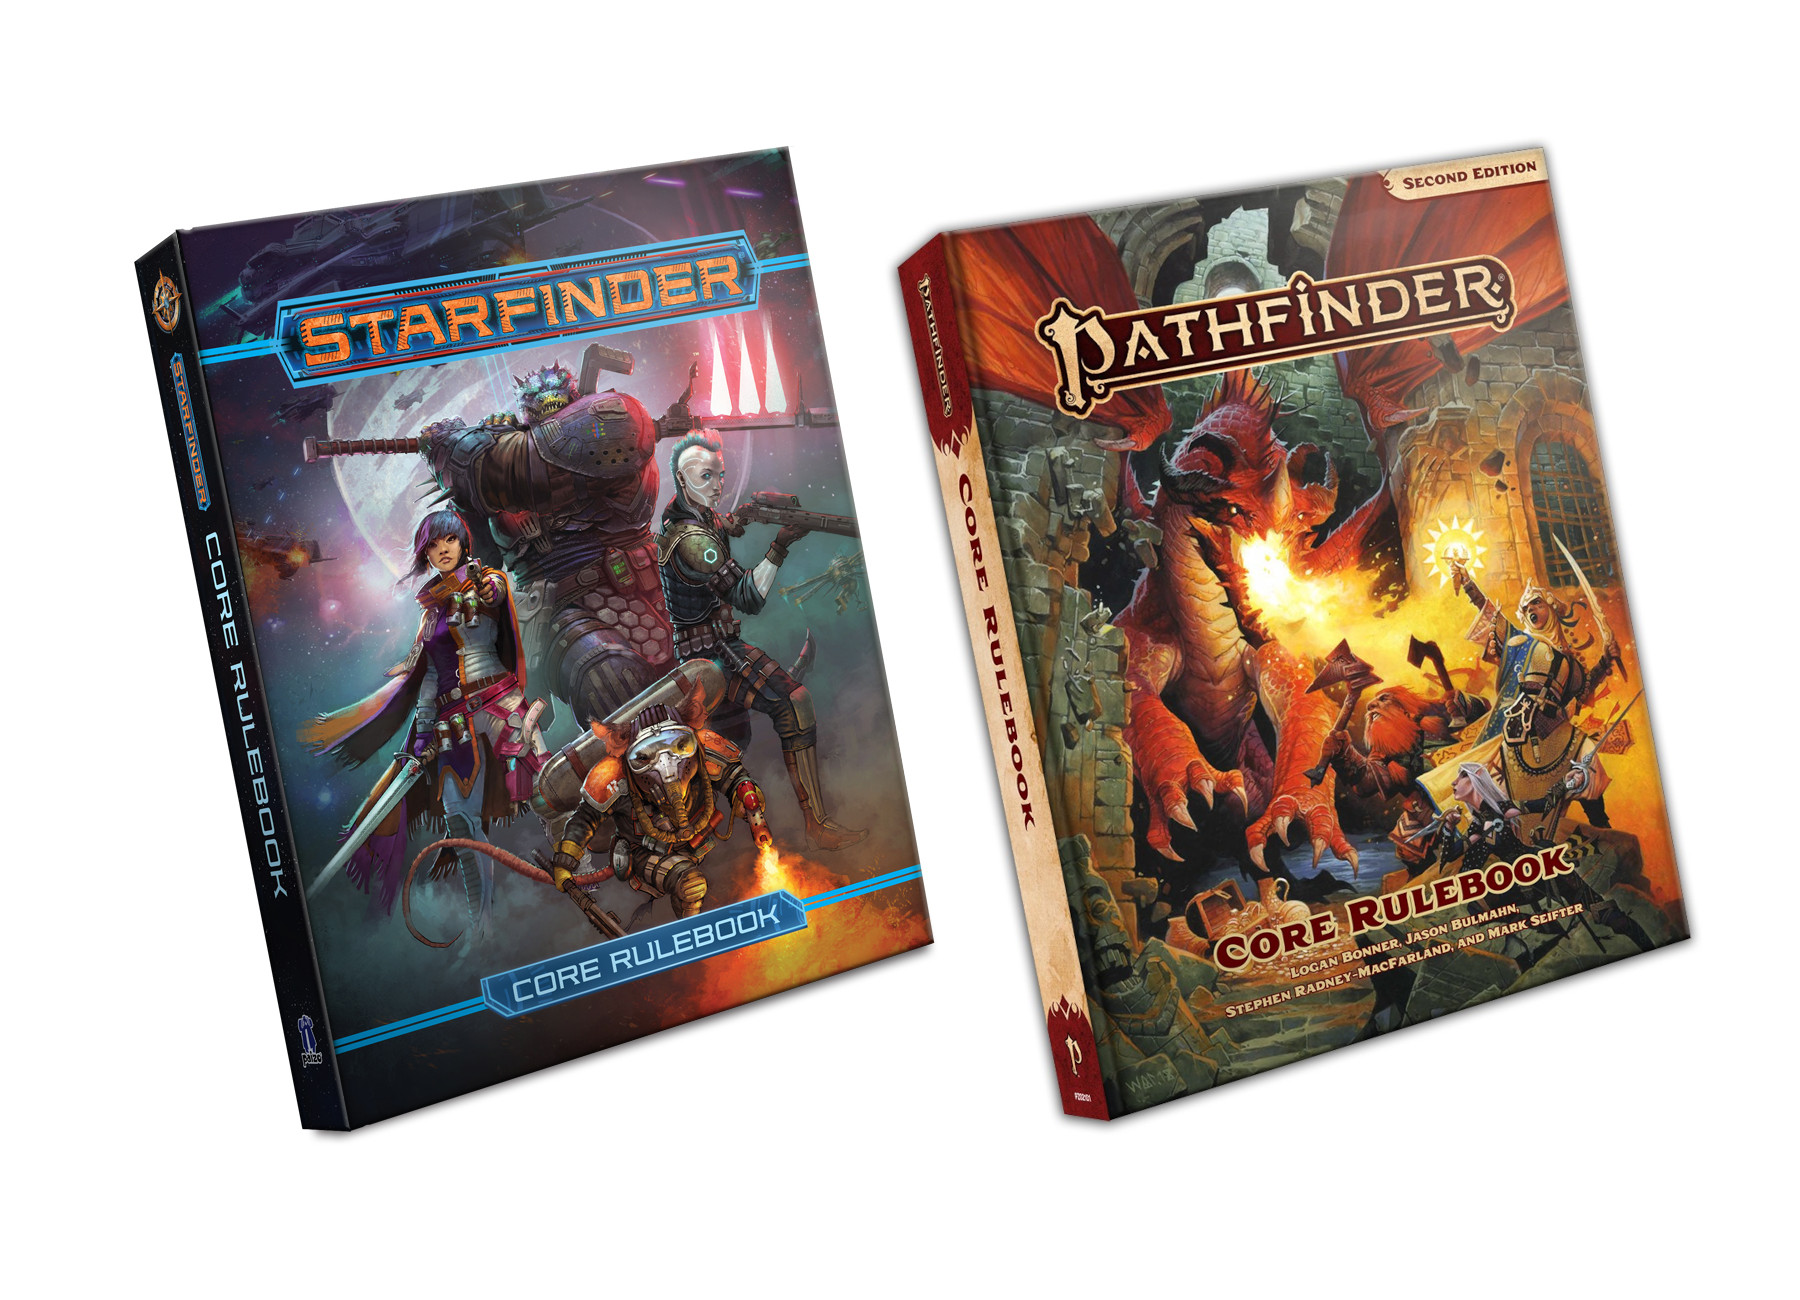 Pathfinder Second Edition Core Rulebook And Starfinder Core Rulebook Digital CD Key